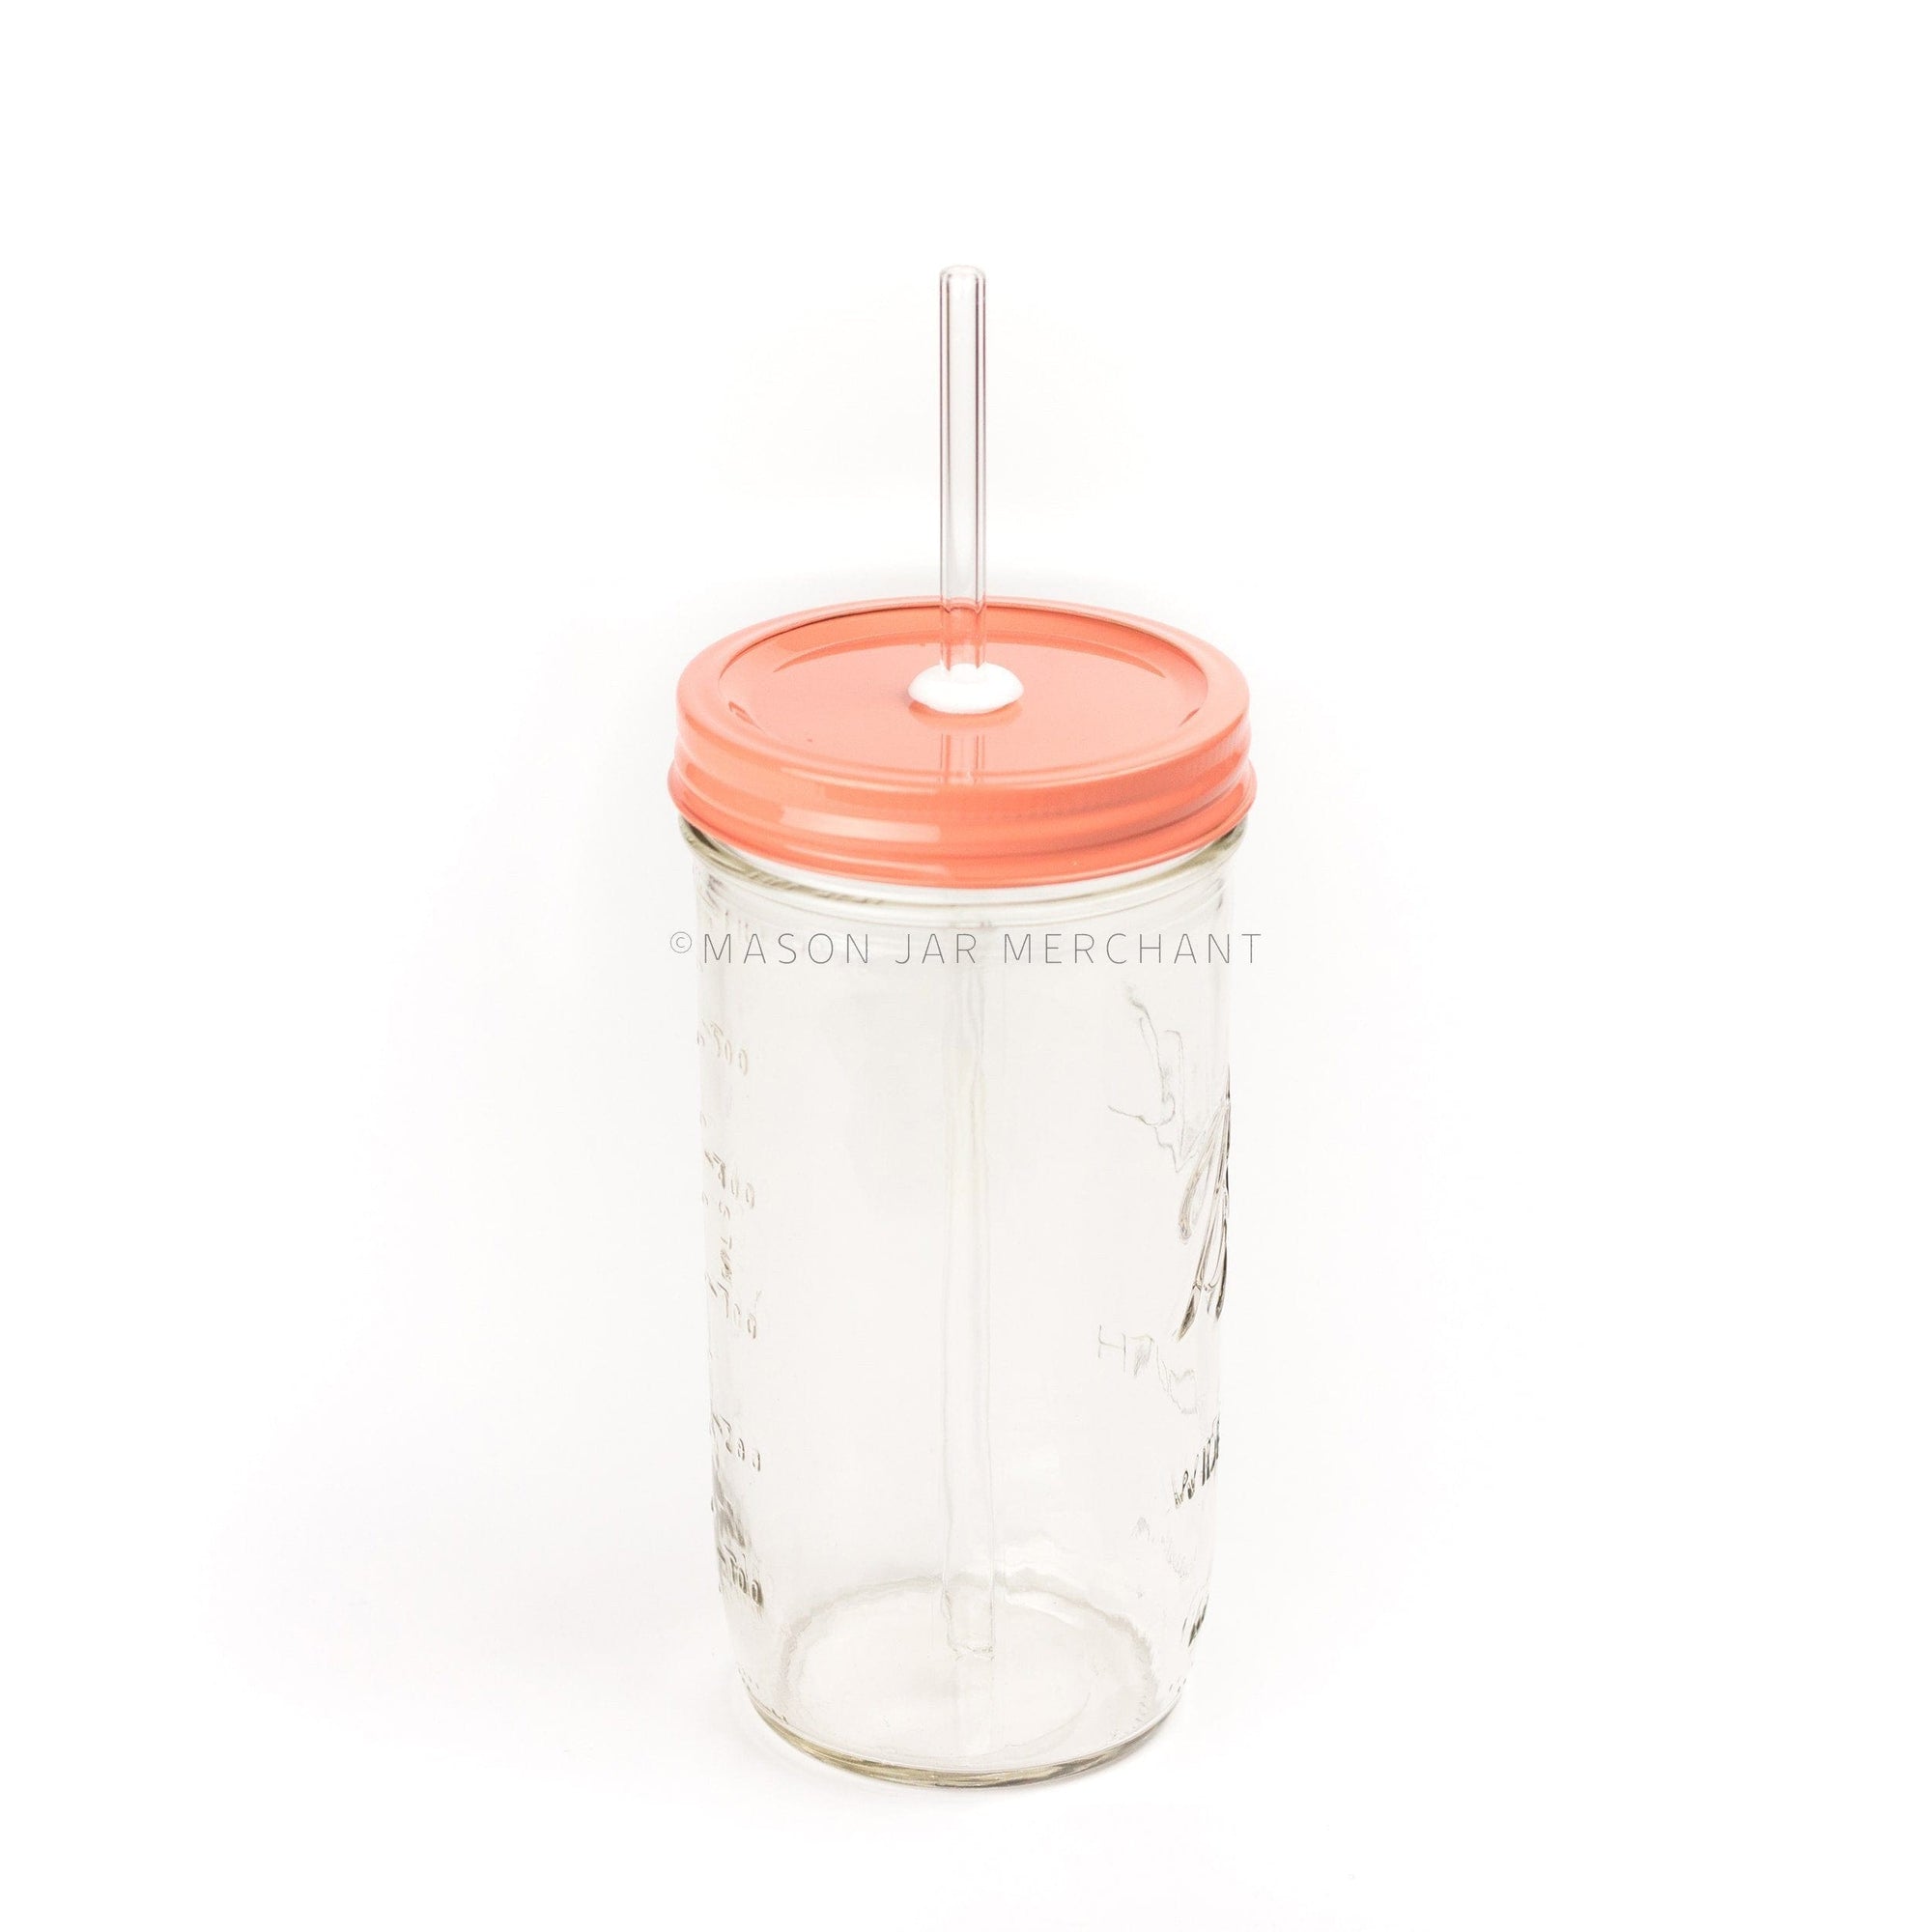 Close-up of a 24 oz mason jar with a coral coloured painted straw lid and a glass straw